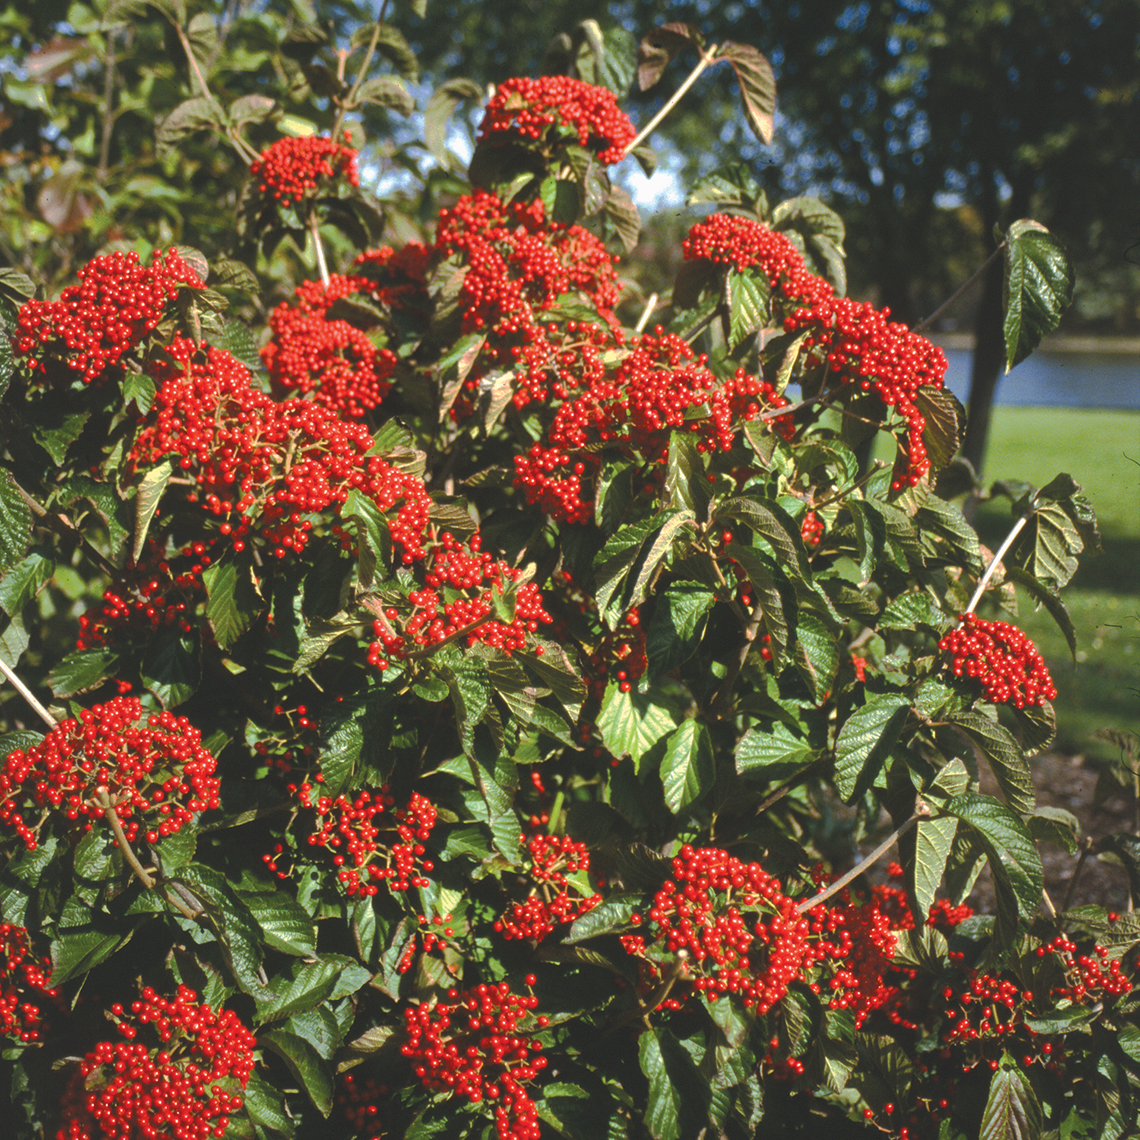 A specimen of Cardinal Candy viburnum covered in red fruit near the Grand River in Michigan